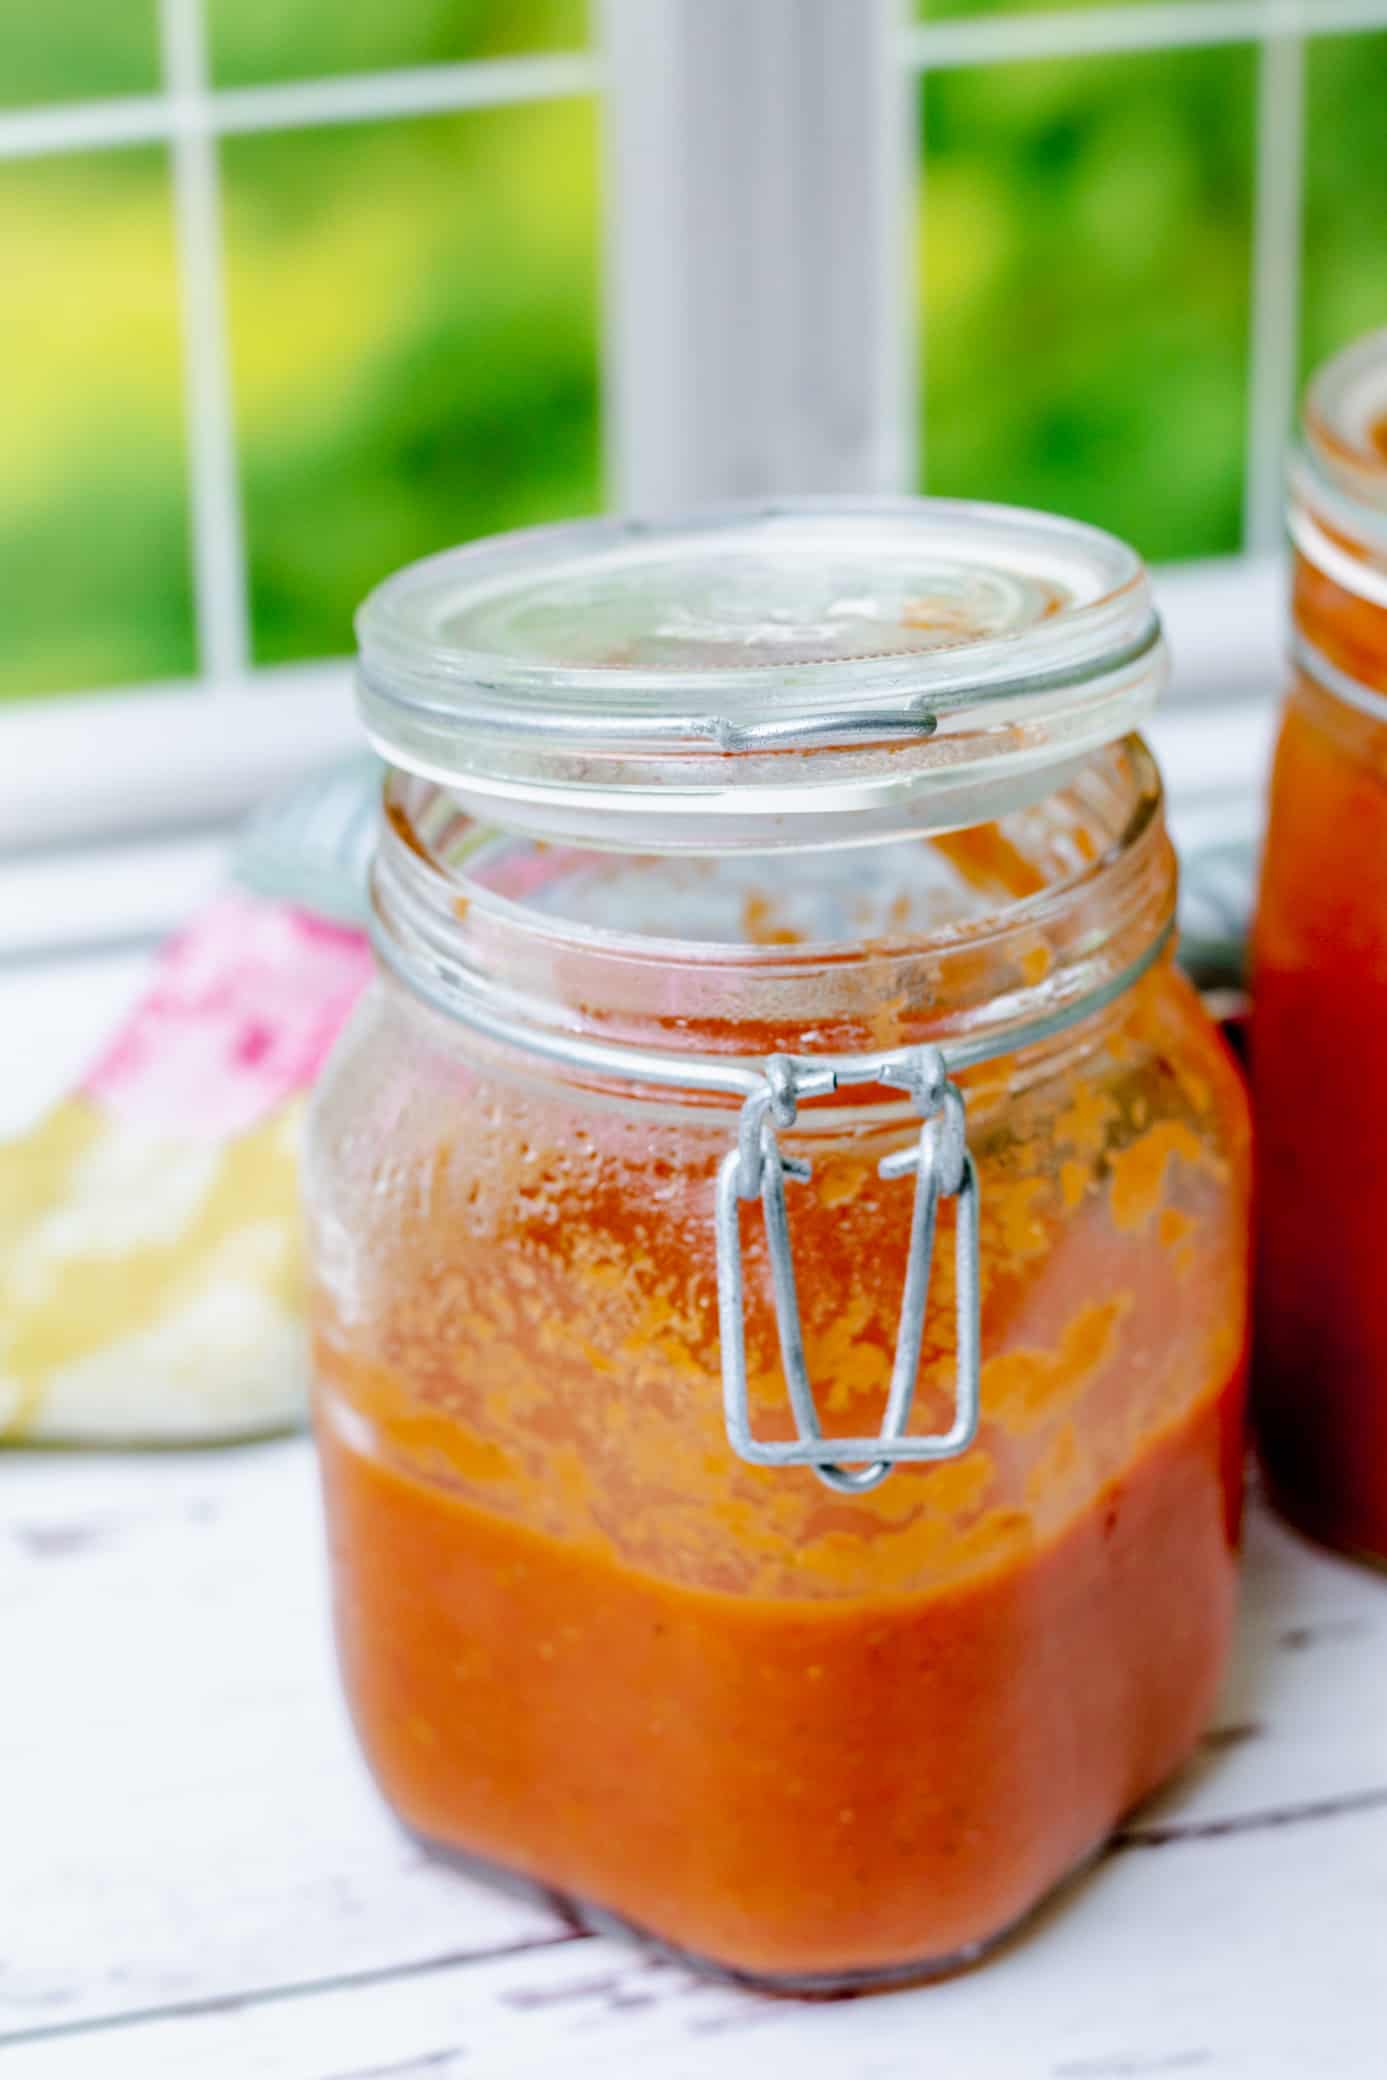 open jar of homemade tomato sauce in front of a window